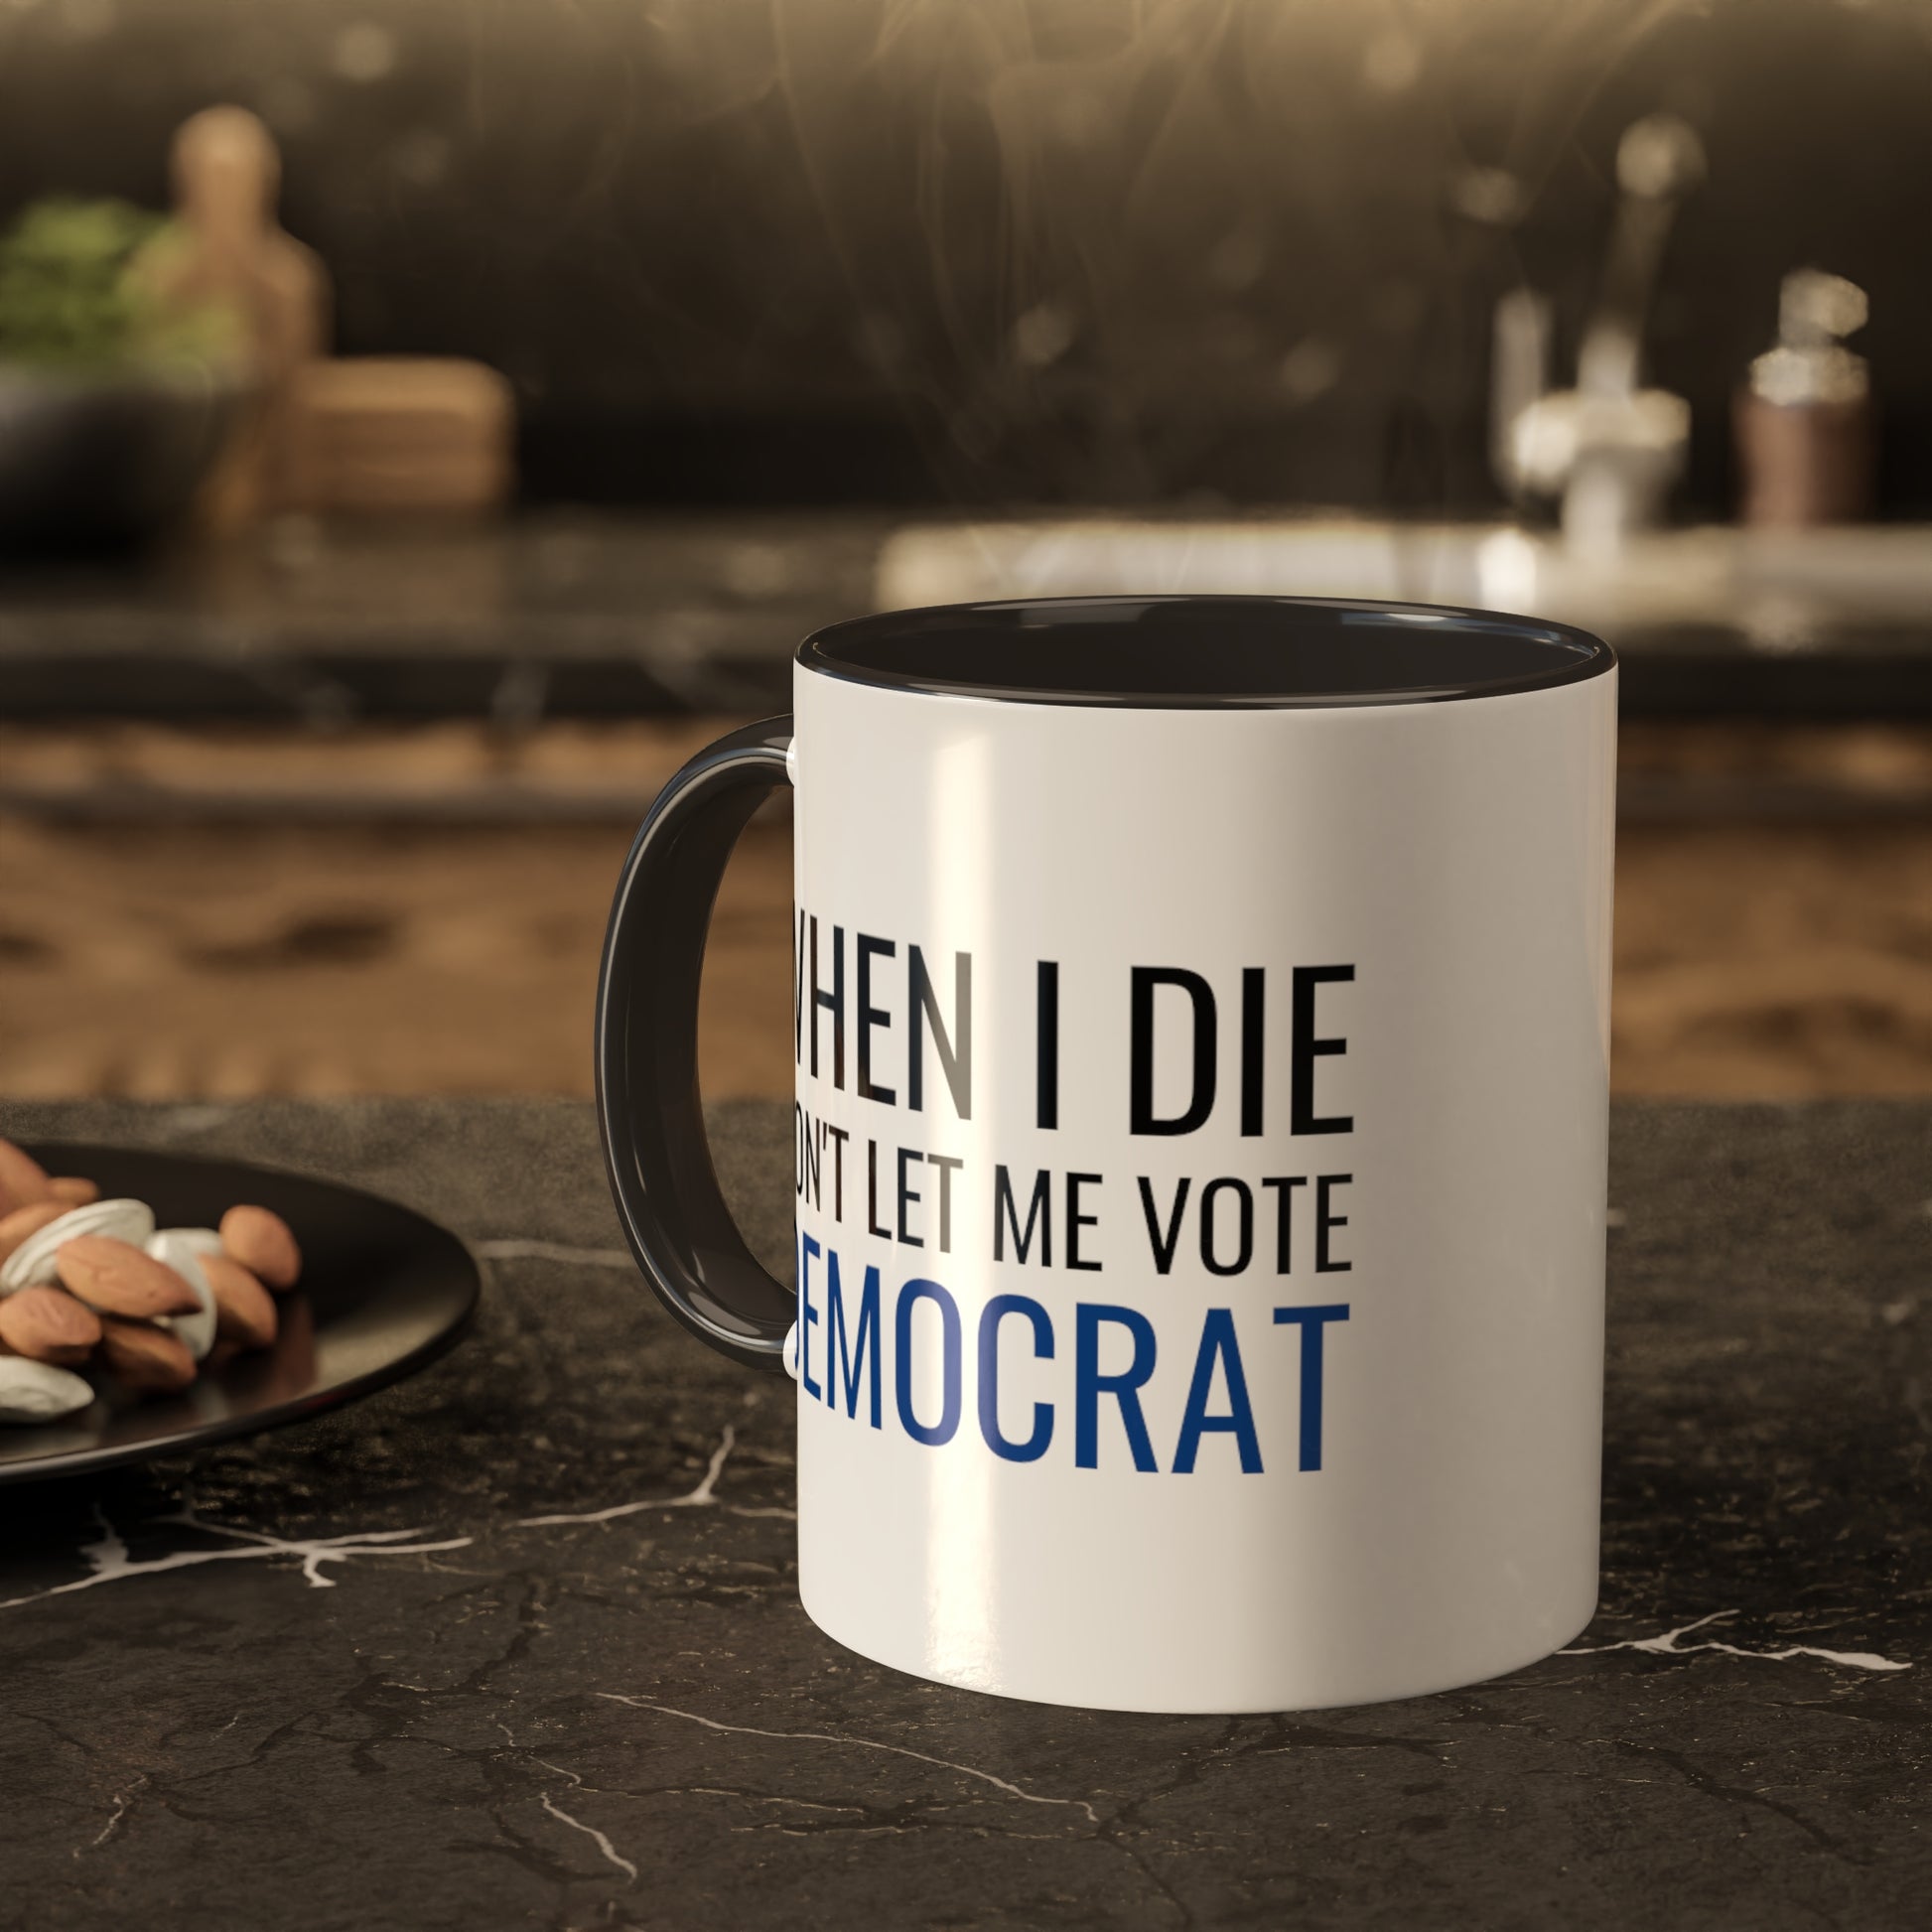 Funny Political Mug, Humorous Coffee Cup, Gag Gift, Conservative Humor, Unique Gift Idea, Political Joke - News For Reasonable People